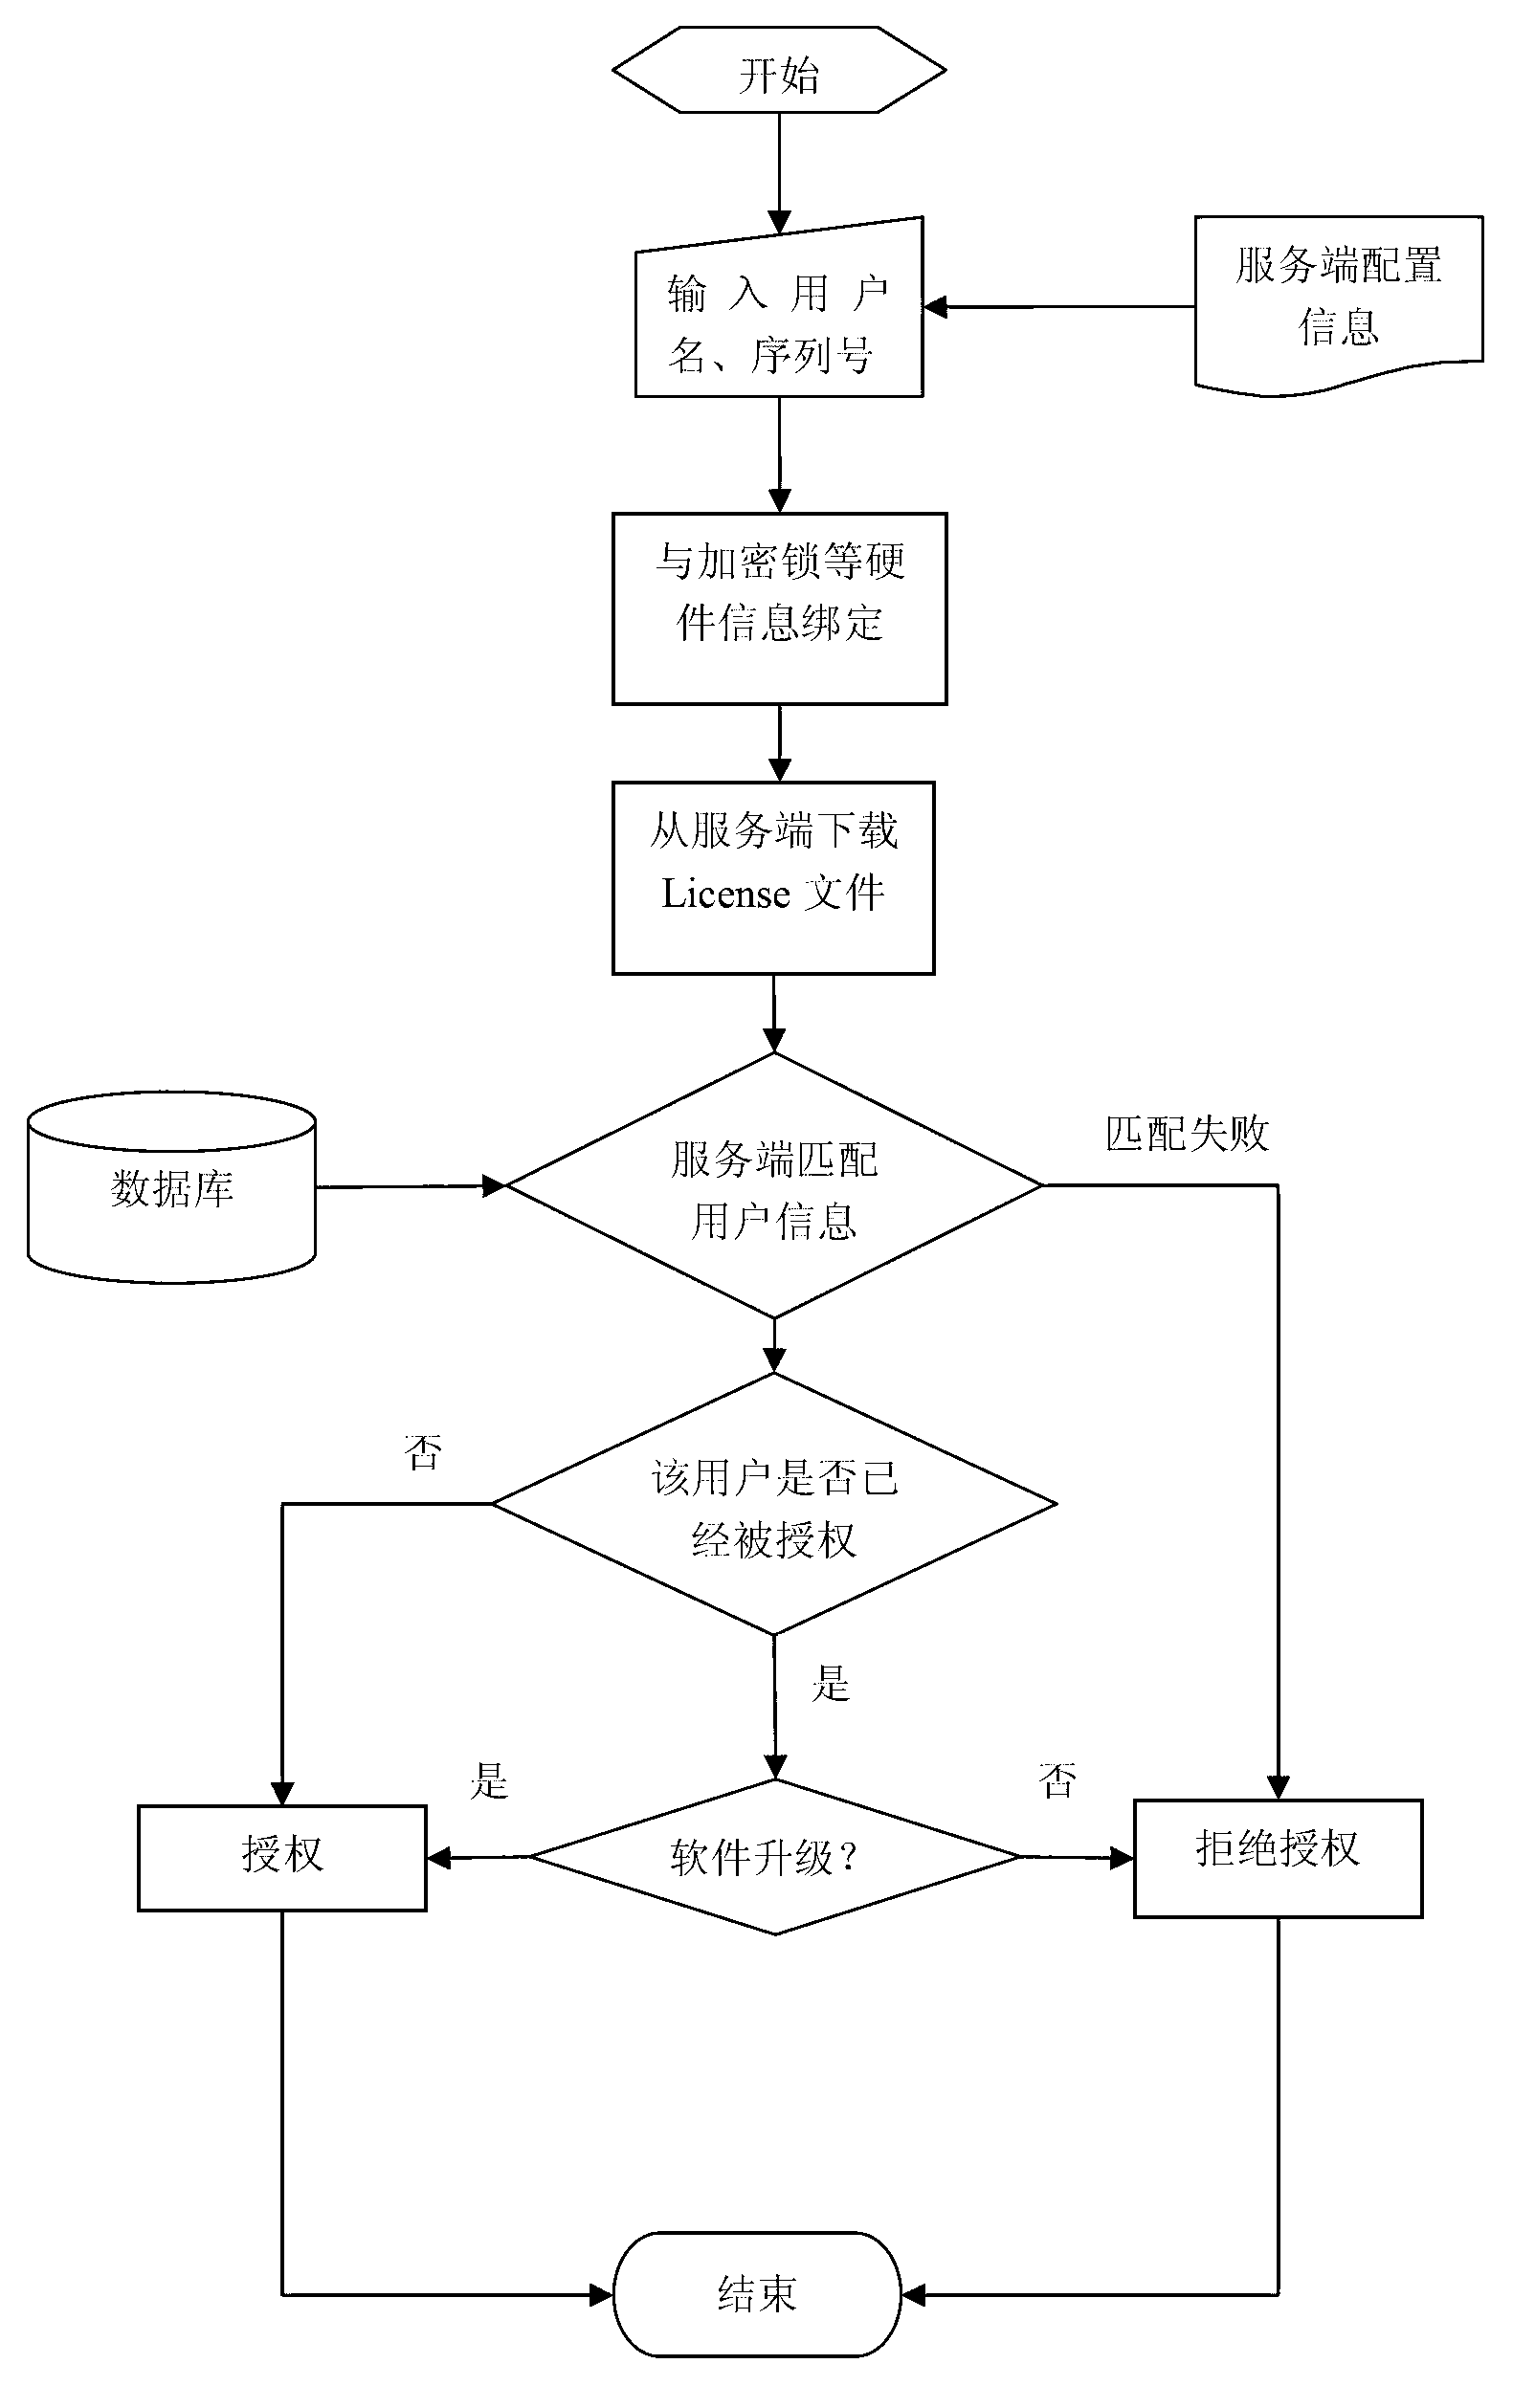 Real-time authorization software License control method